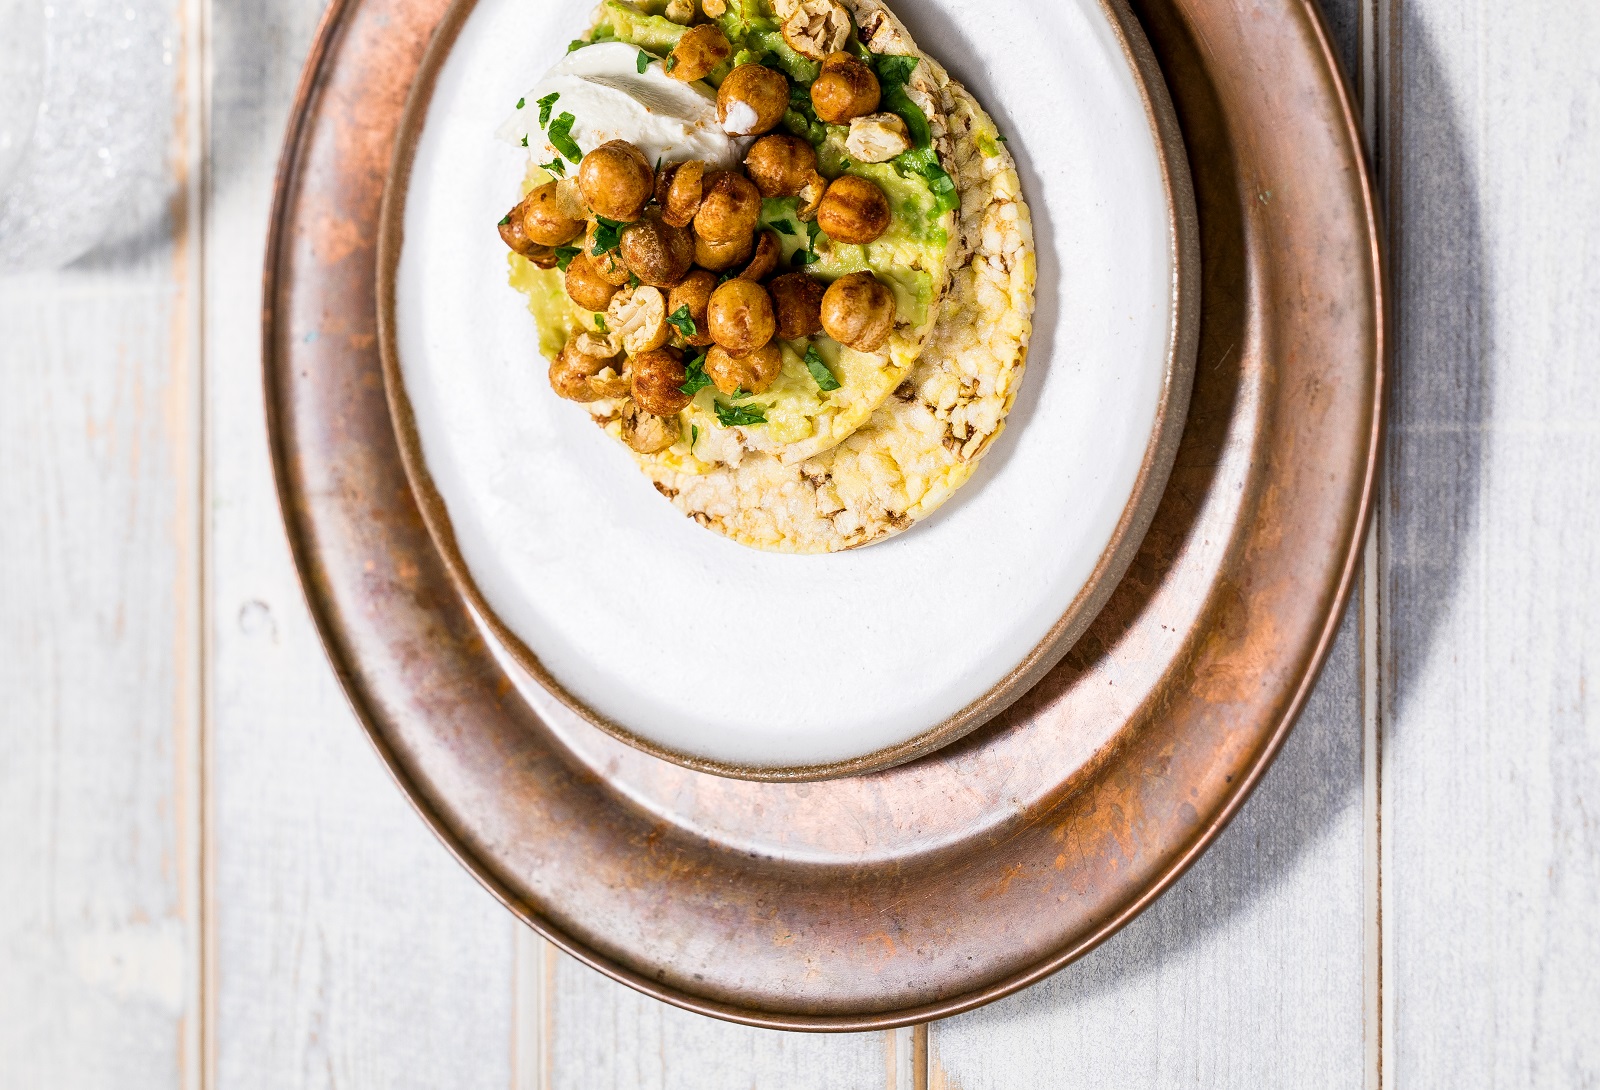 Avocado, Creme Fraiche, Roasted Chickpeas & parsley on CORN THINS slices